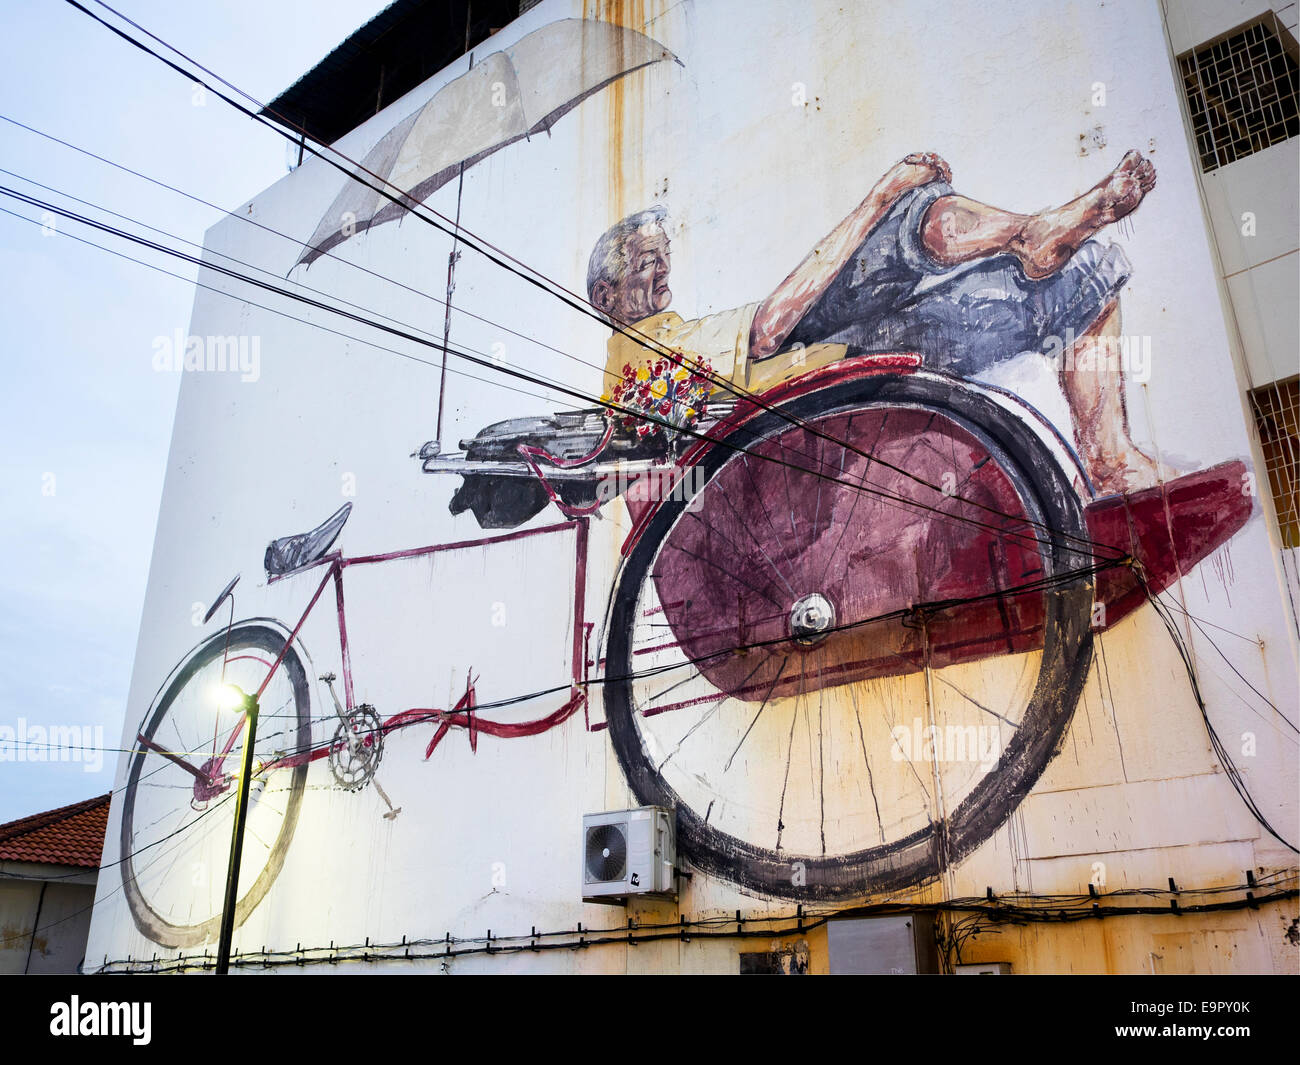 'The Awaiting Trishaw Paddler' street art mural painted by Lithuanian artist Ernest Zacharevic in George Town, Penang, Malaysia. Stock Photo